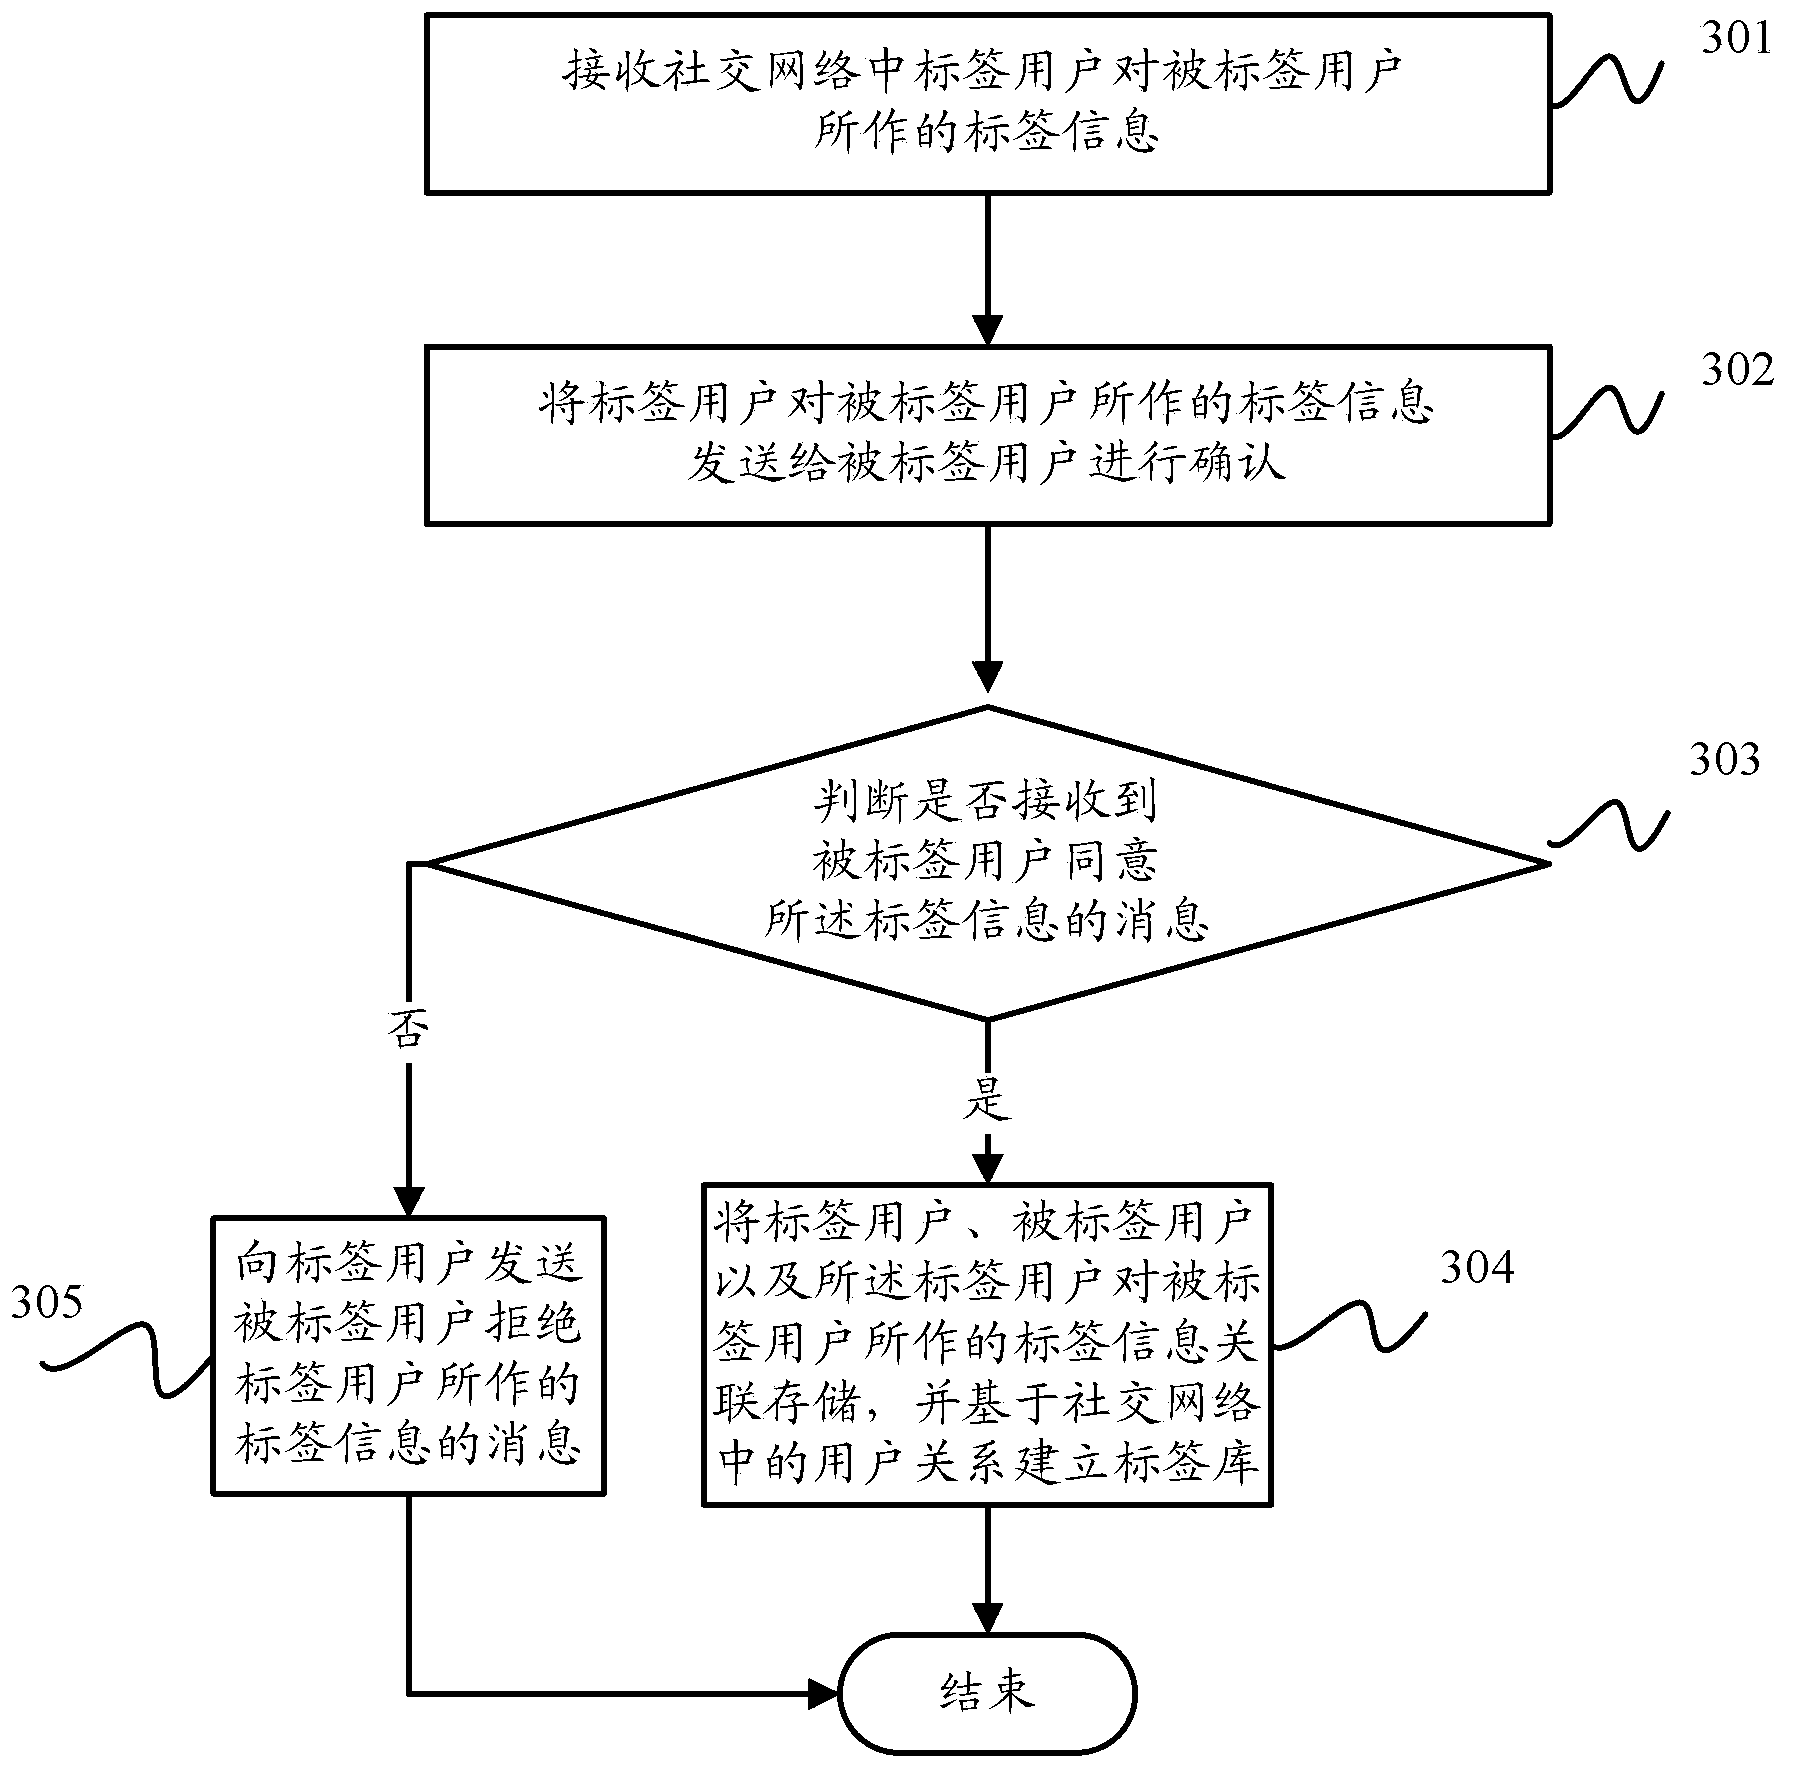 Methods and devices for building tag library and searching users